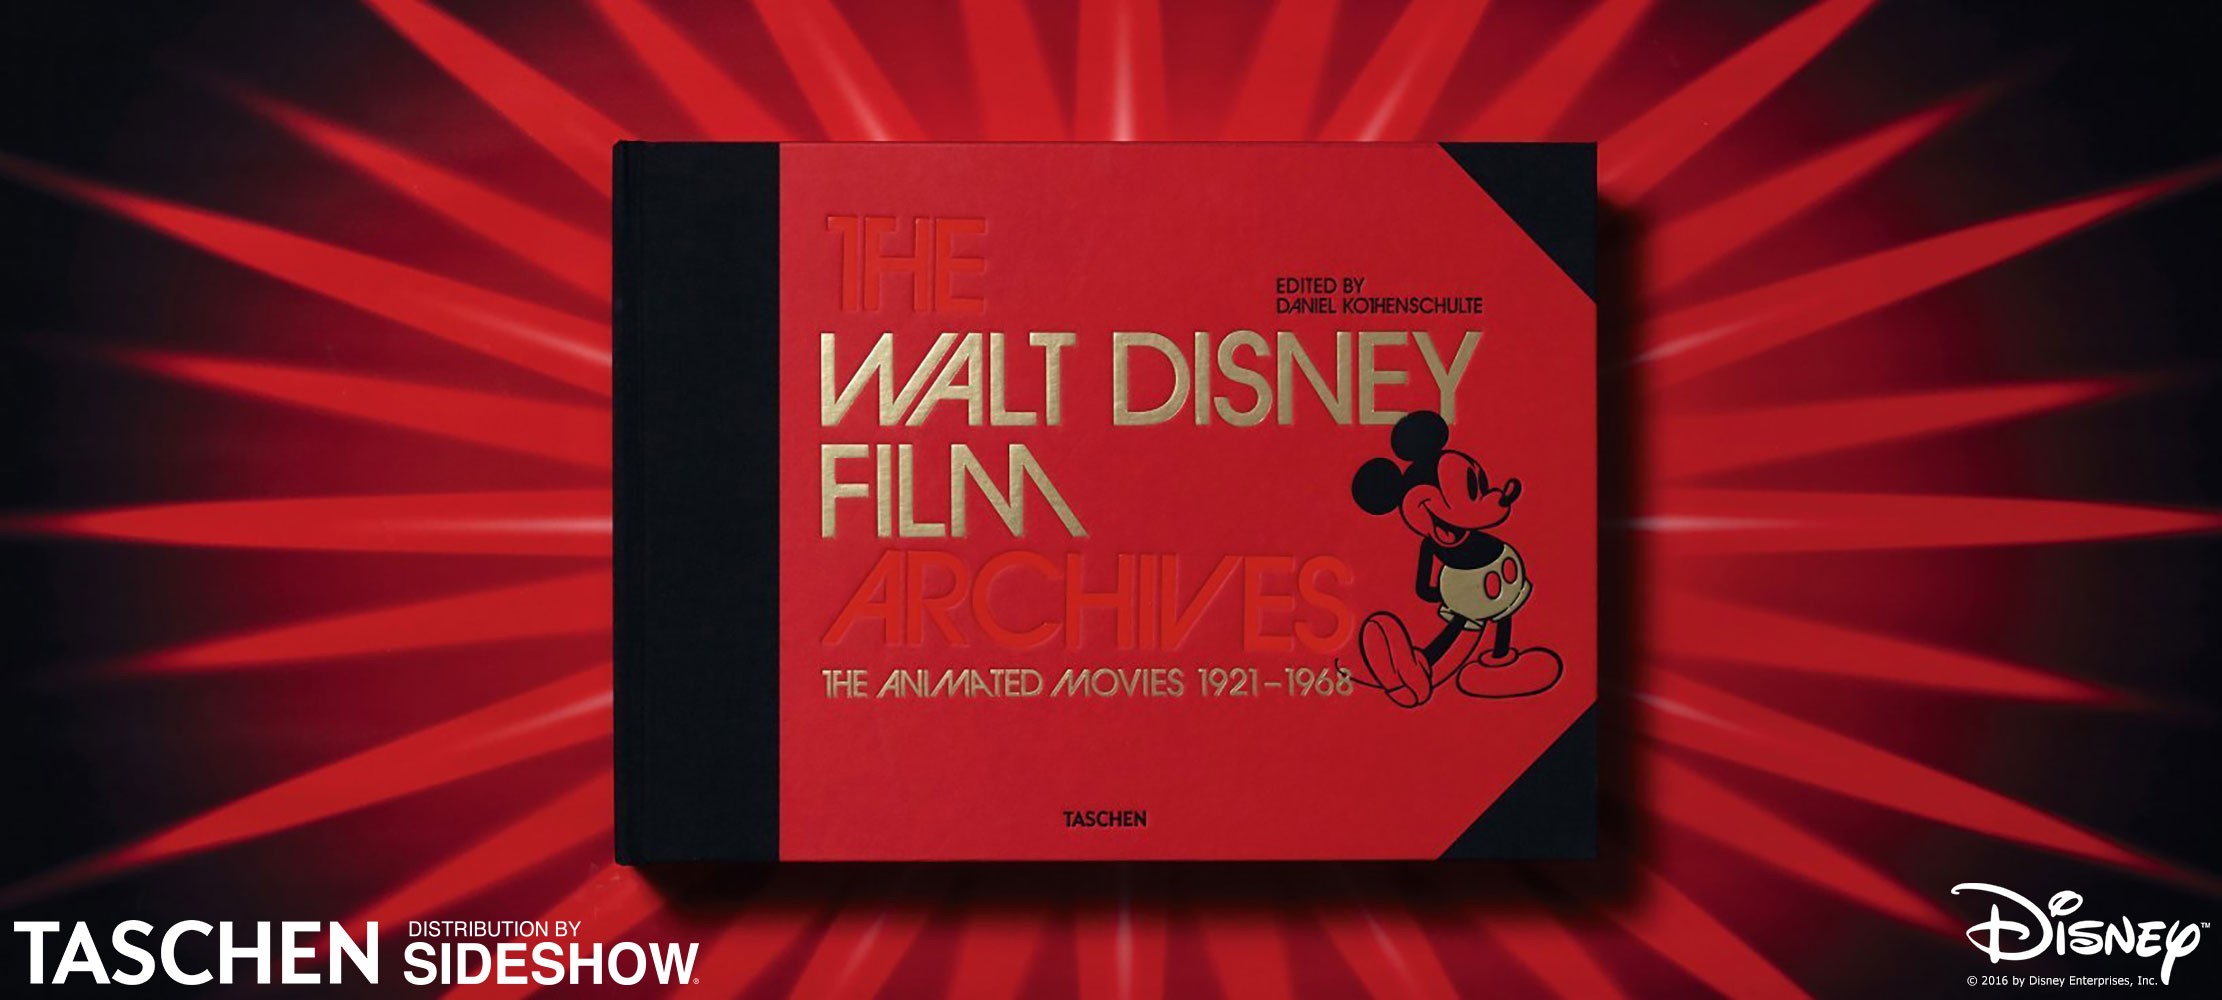 Wondrous Images from The Walt Disney Film Archives: The Animated Movies  1921–1968 - D23